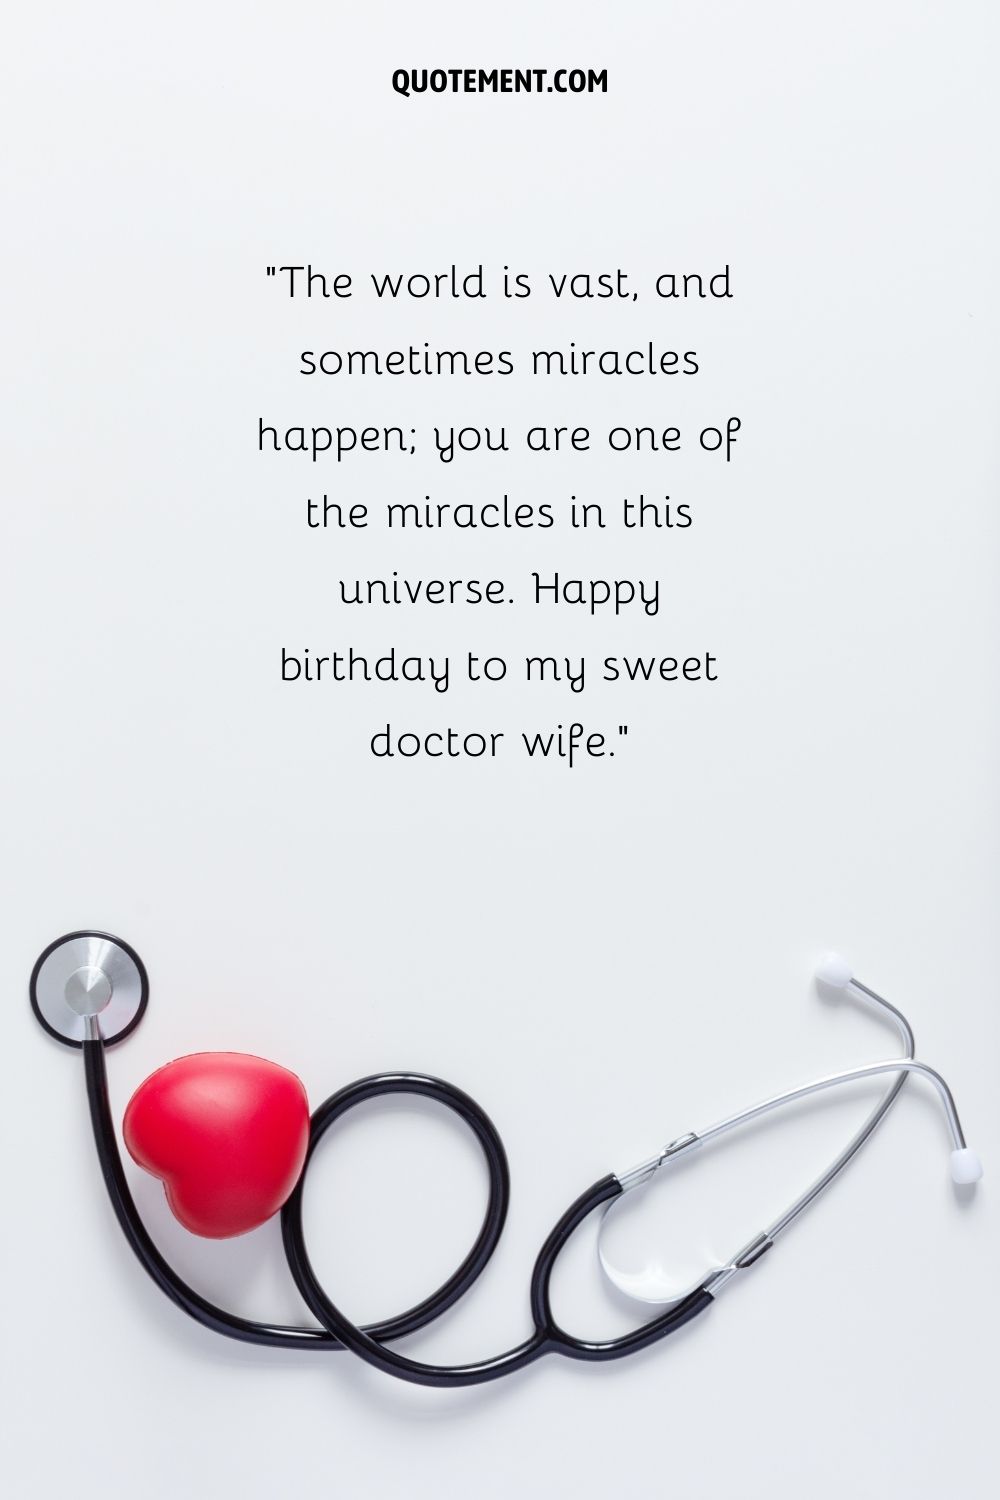 sweet birthday wish for wife represented by happy birthday doctor wish